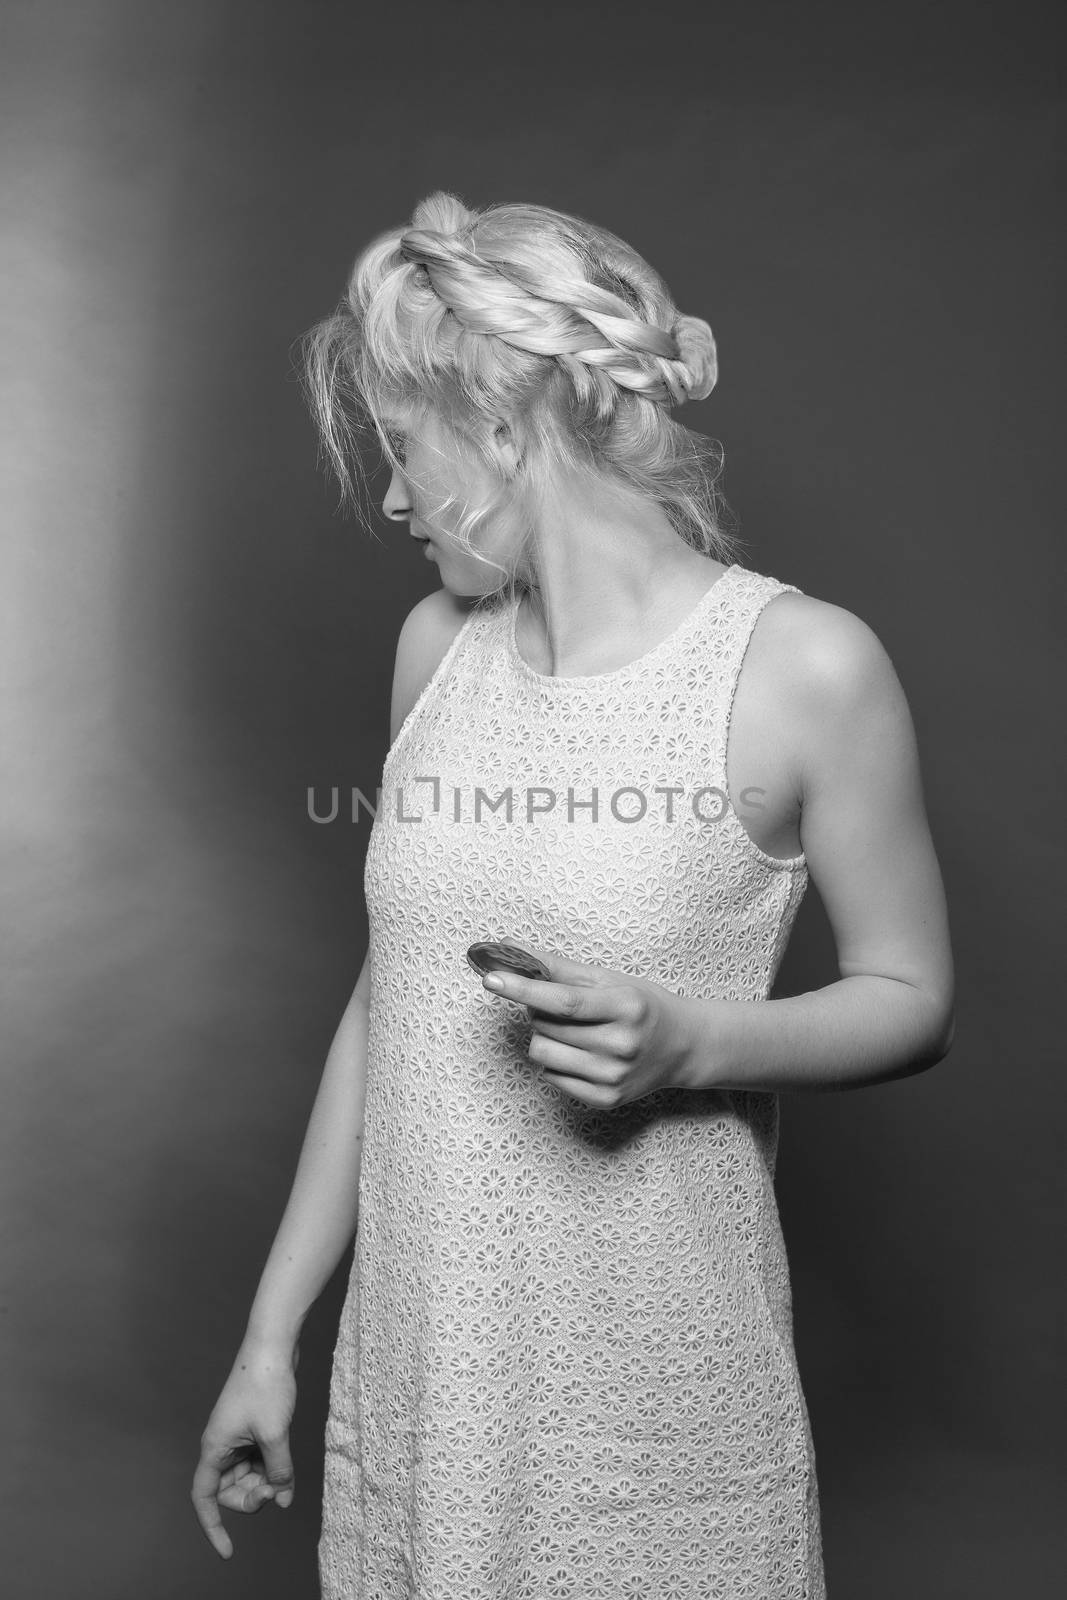 Blonde girl in mini dress made of lace and stylish hairstyle with biscuit in hand looks backwards. Black and white image, studio shot.